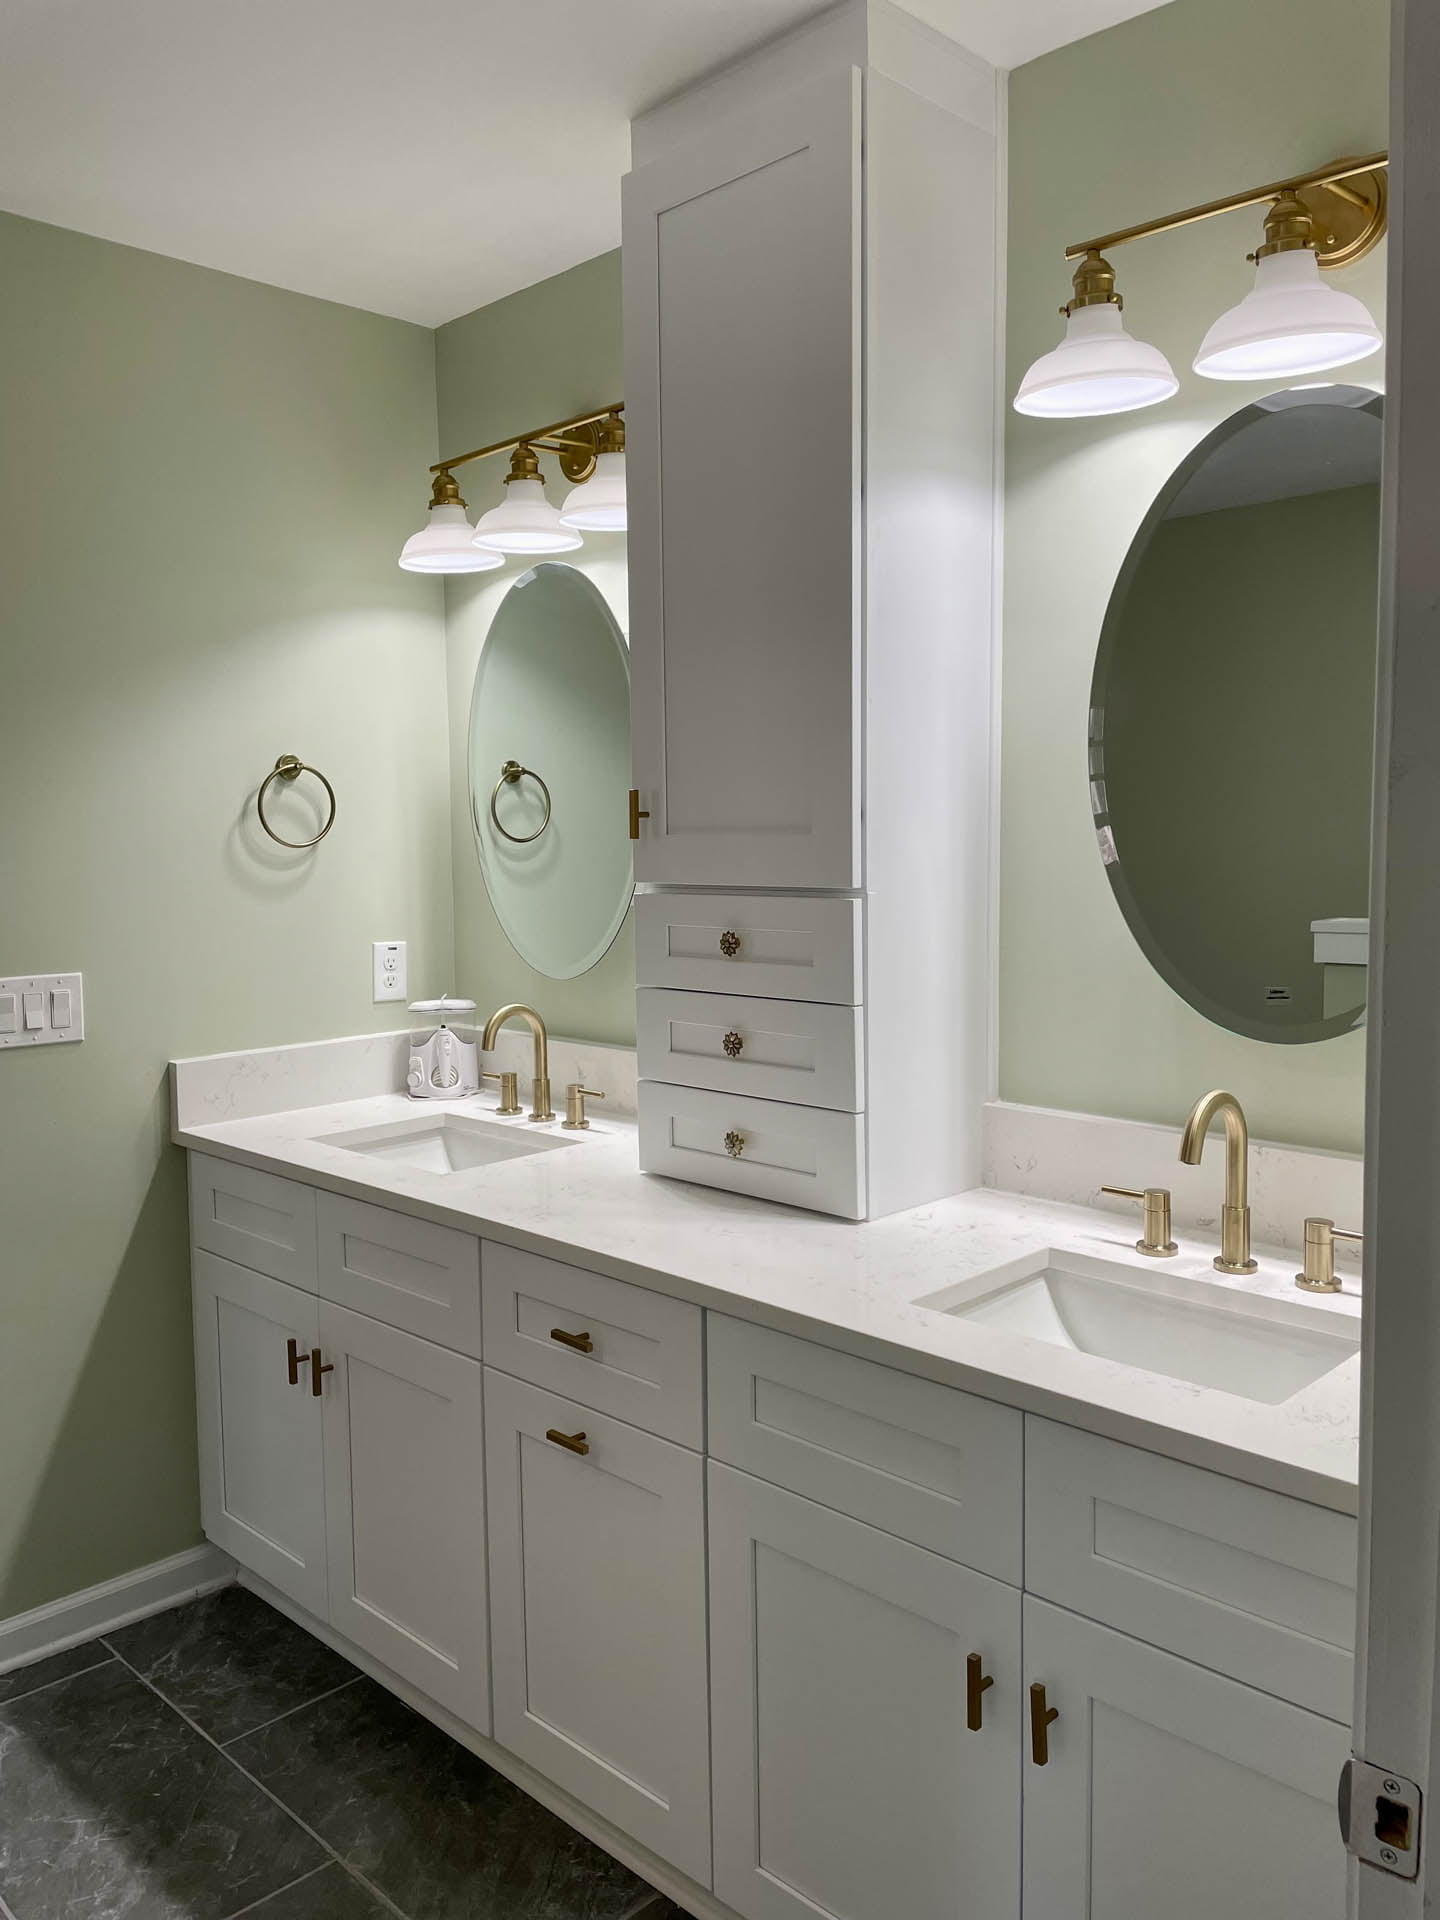 A bathroom with two sinks and a round mirror.